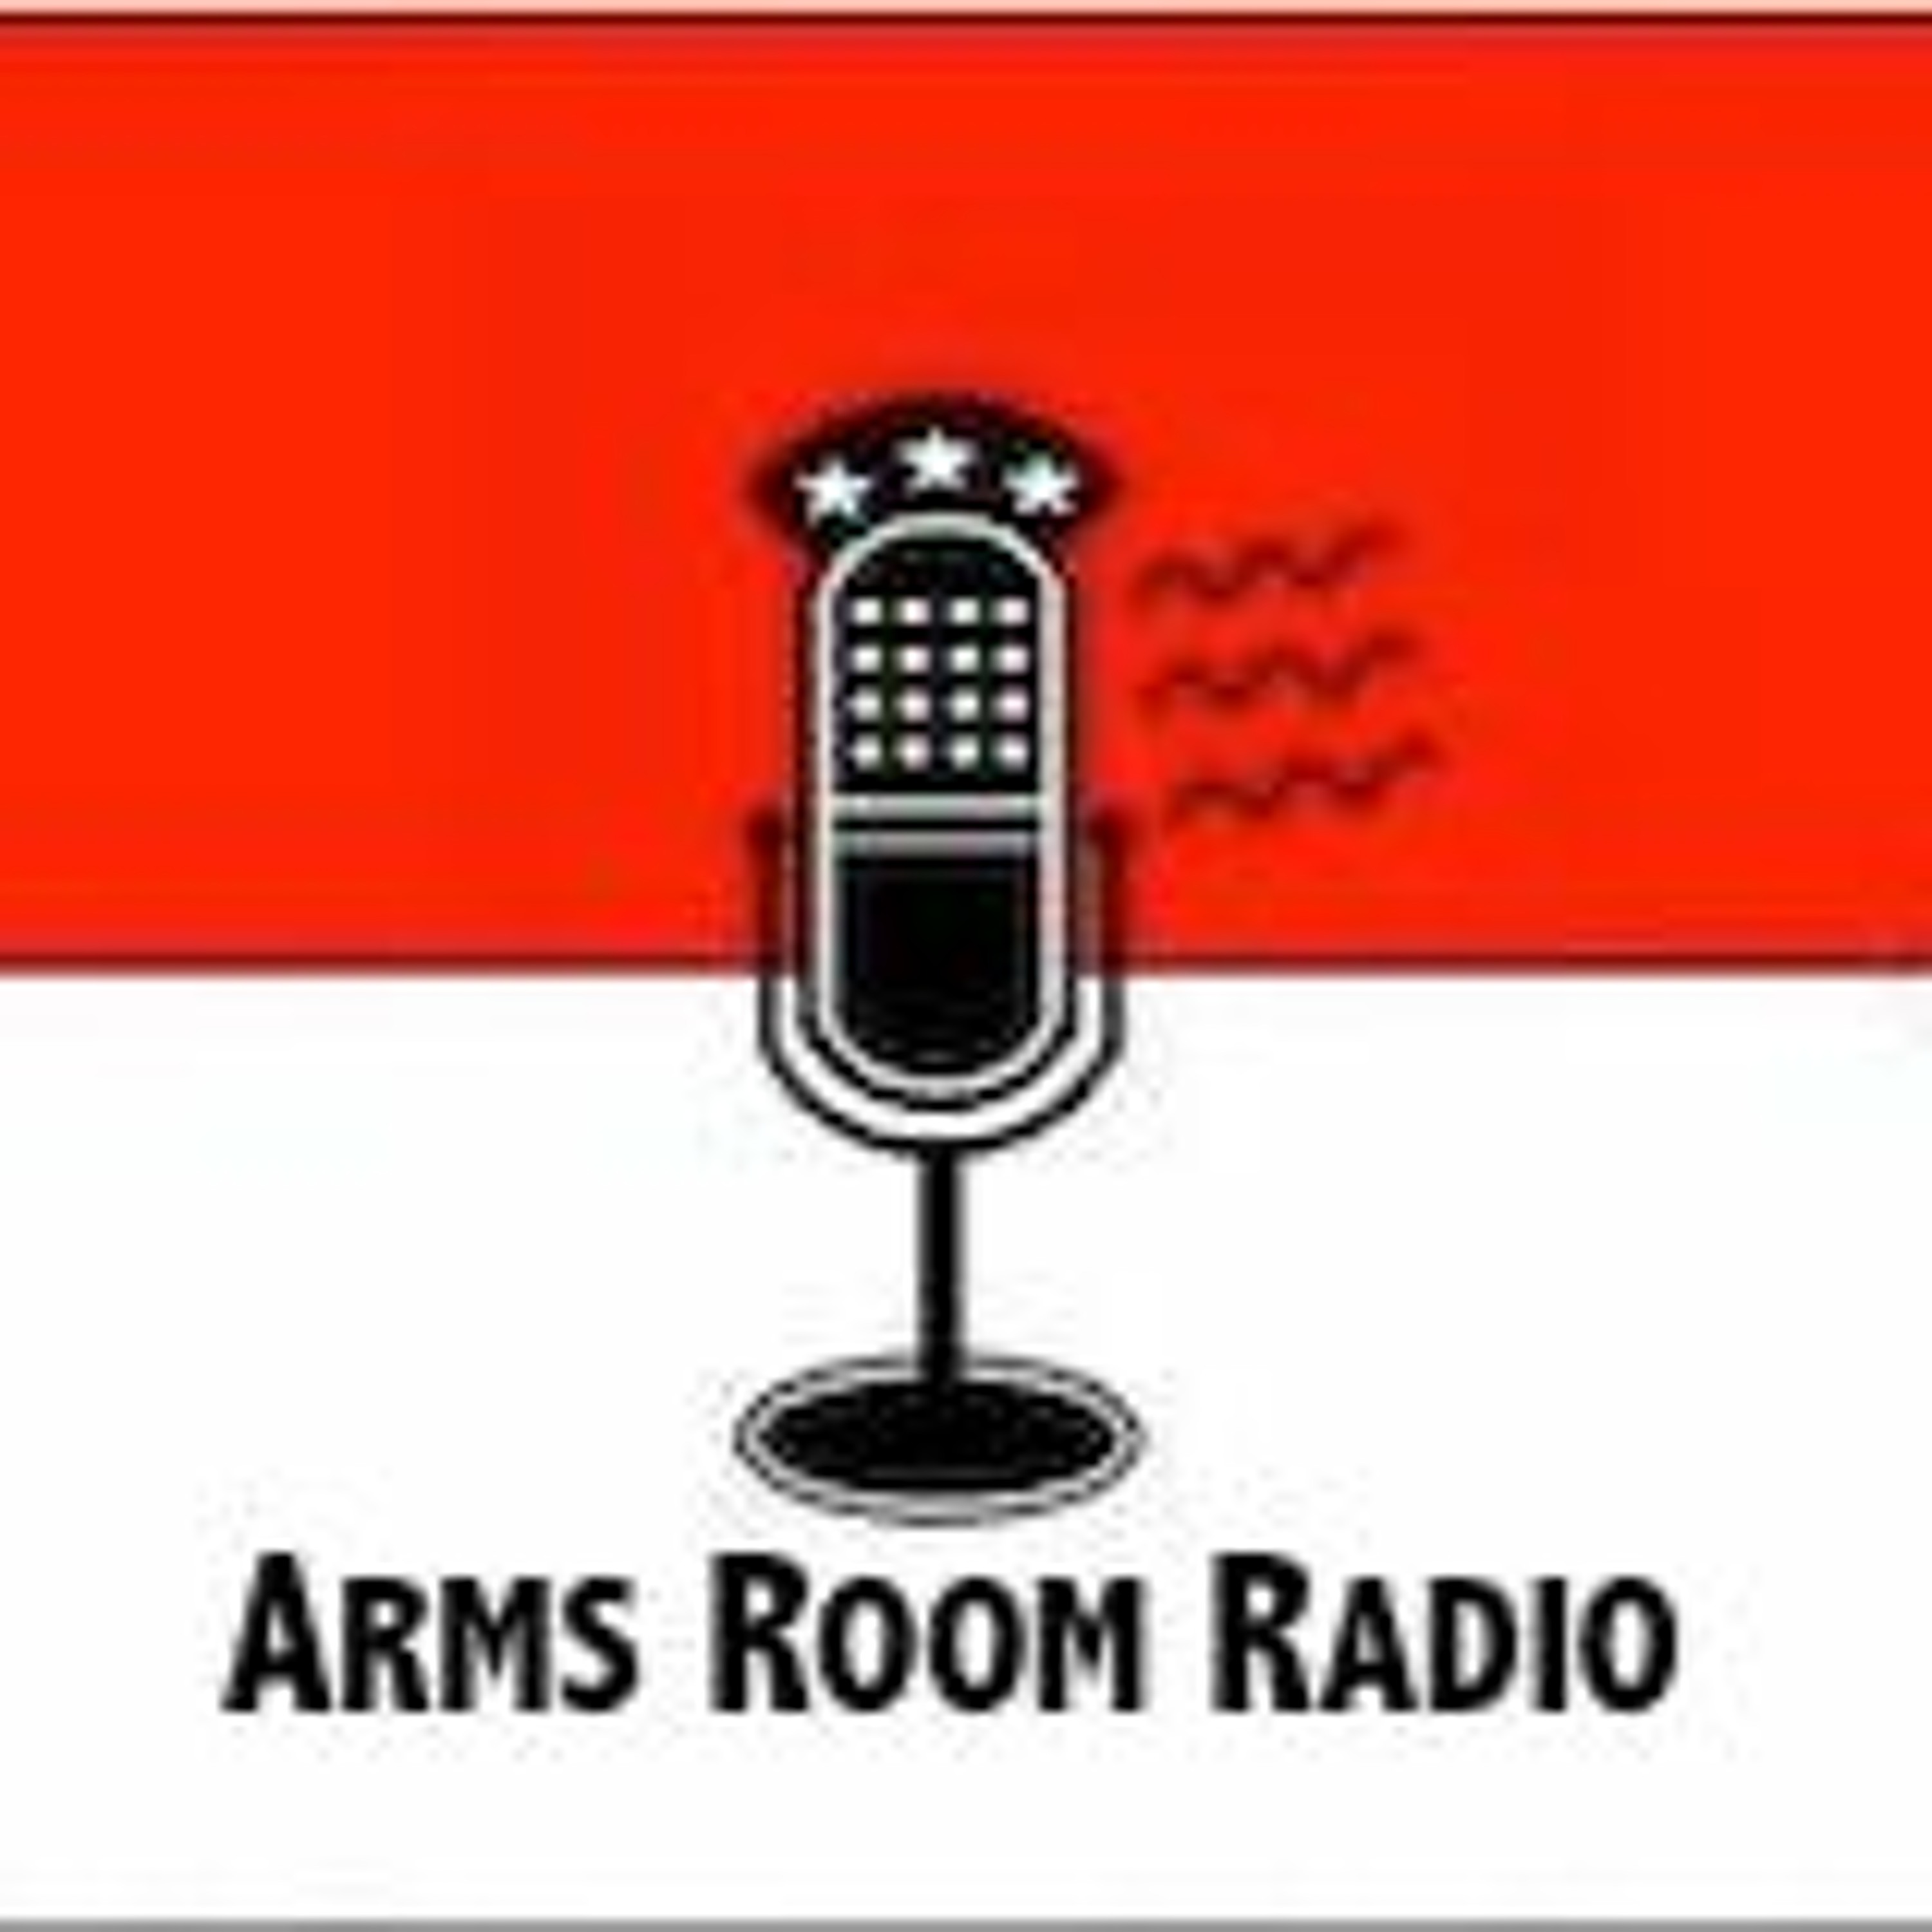 ArmsRoomRadio 08.19.23 How many guns in US and ammo to Ukraine